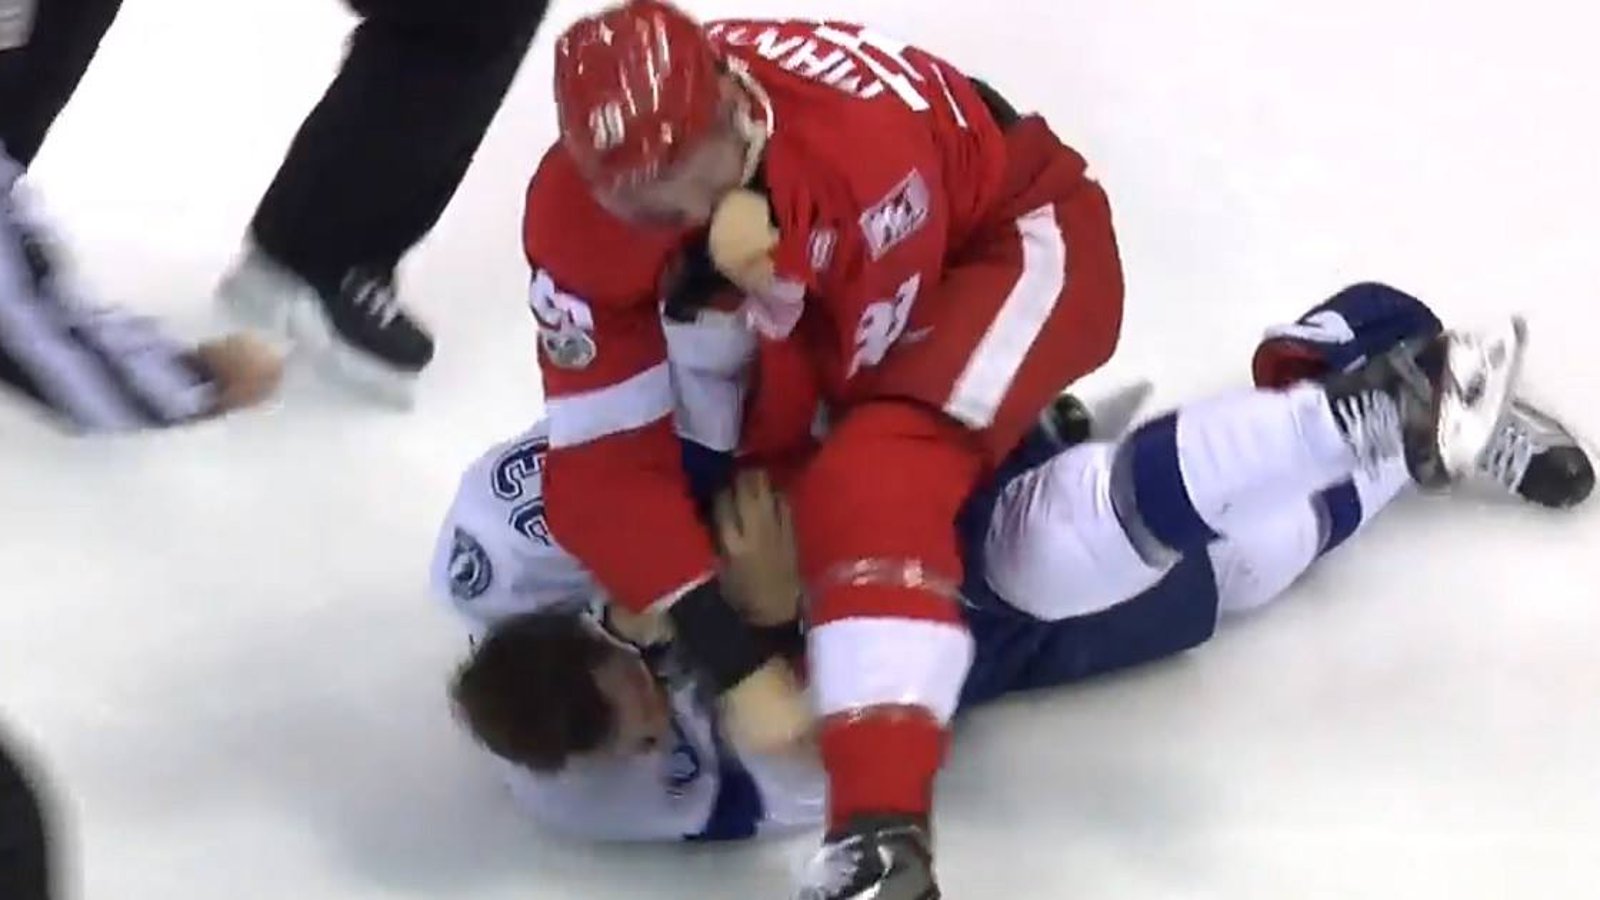 Mantha lays down the law (and McKegg) with late punch. 